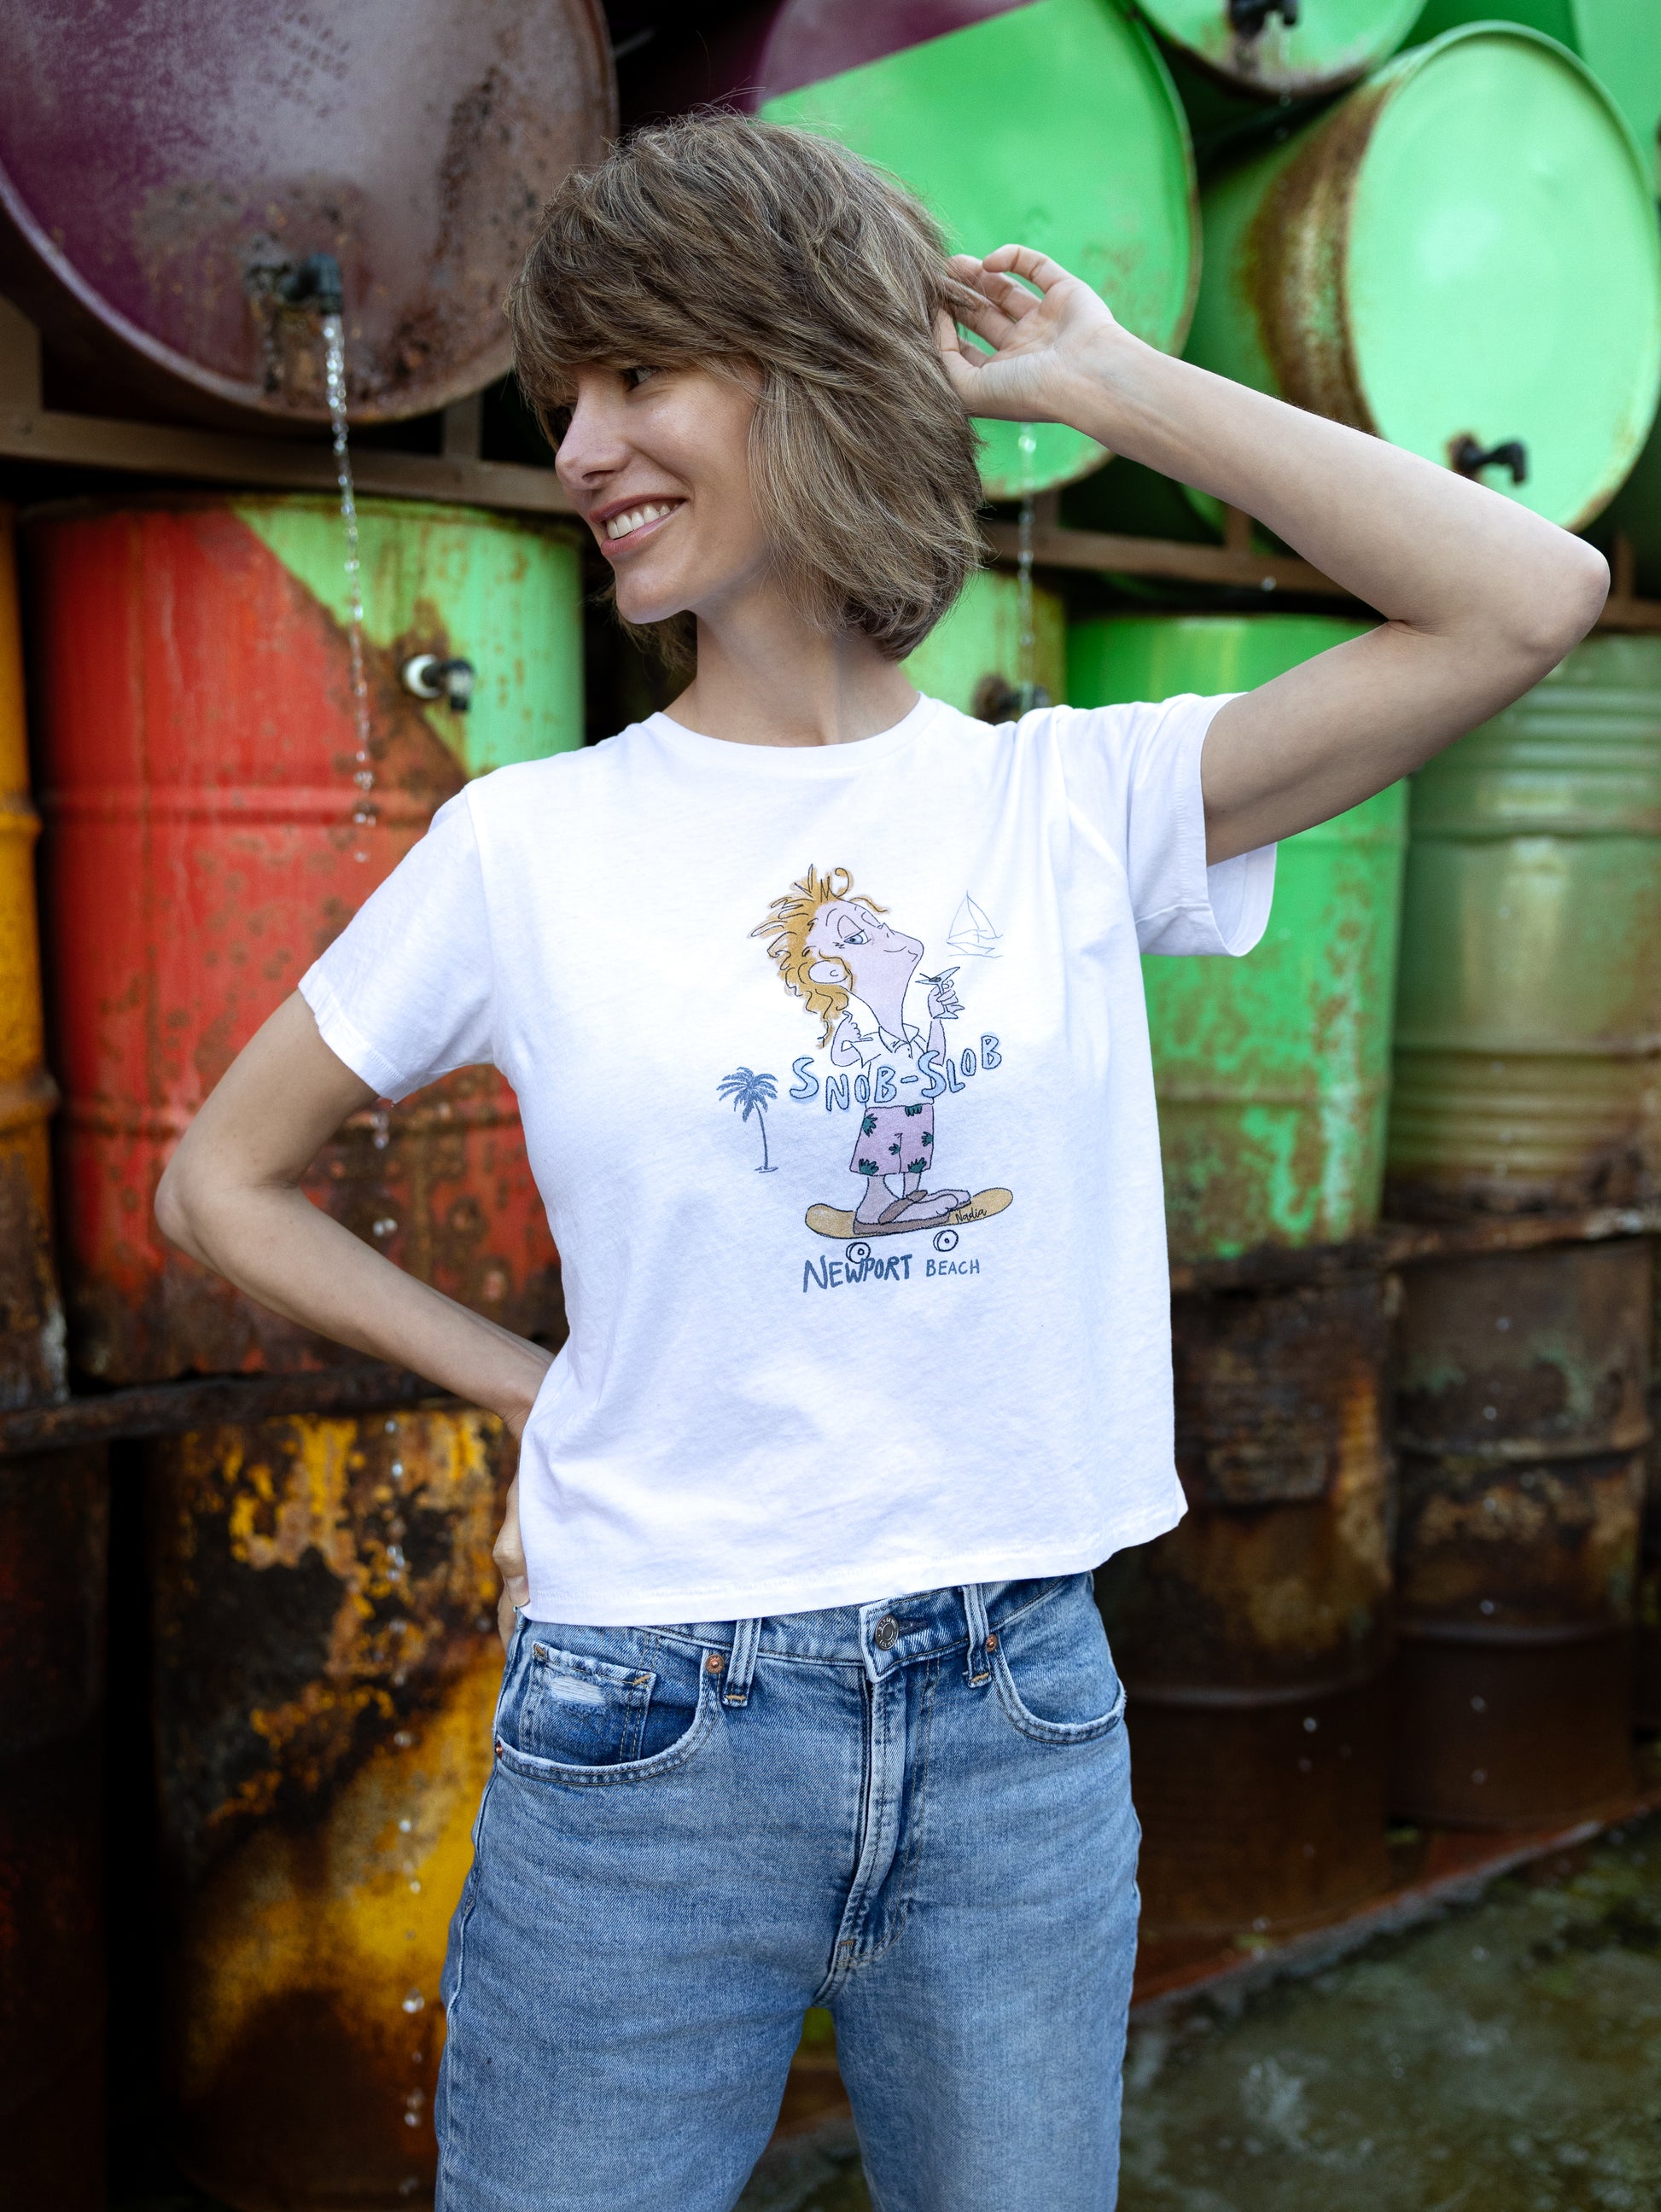 Snob Slob Newport Billy illustrated character graphic tee for women.  Newport Beach graphic Tee